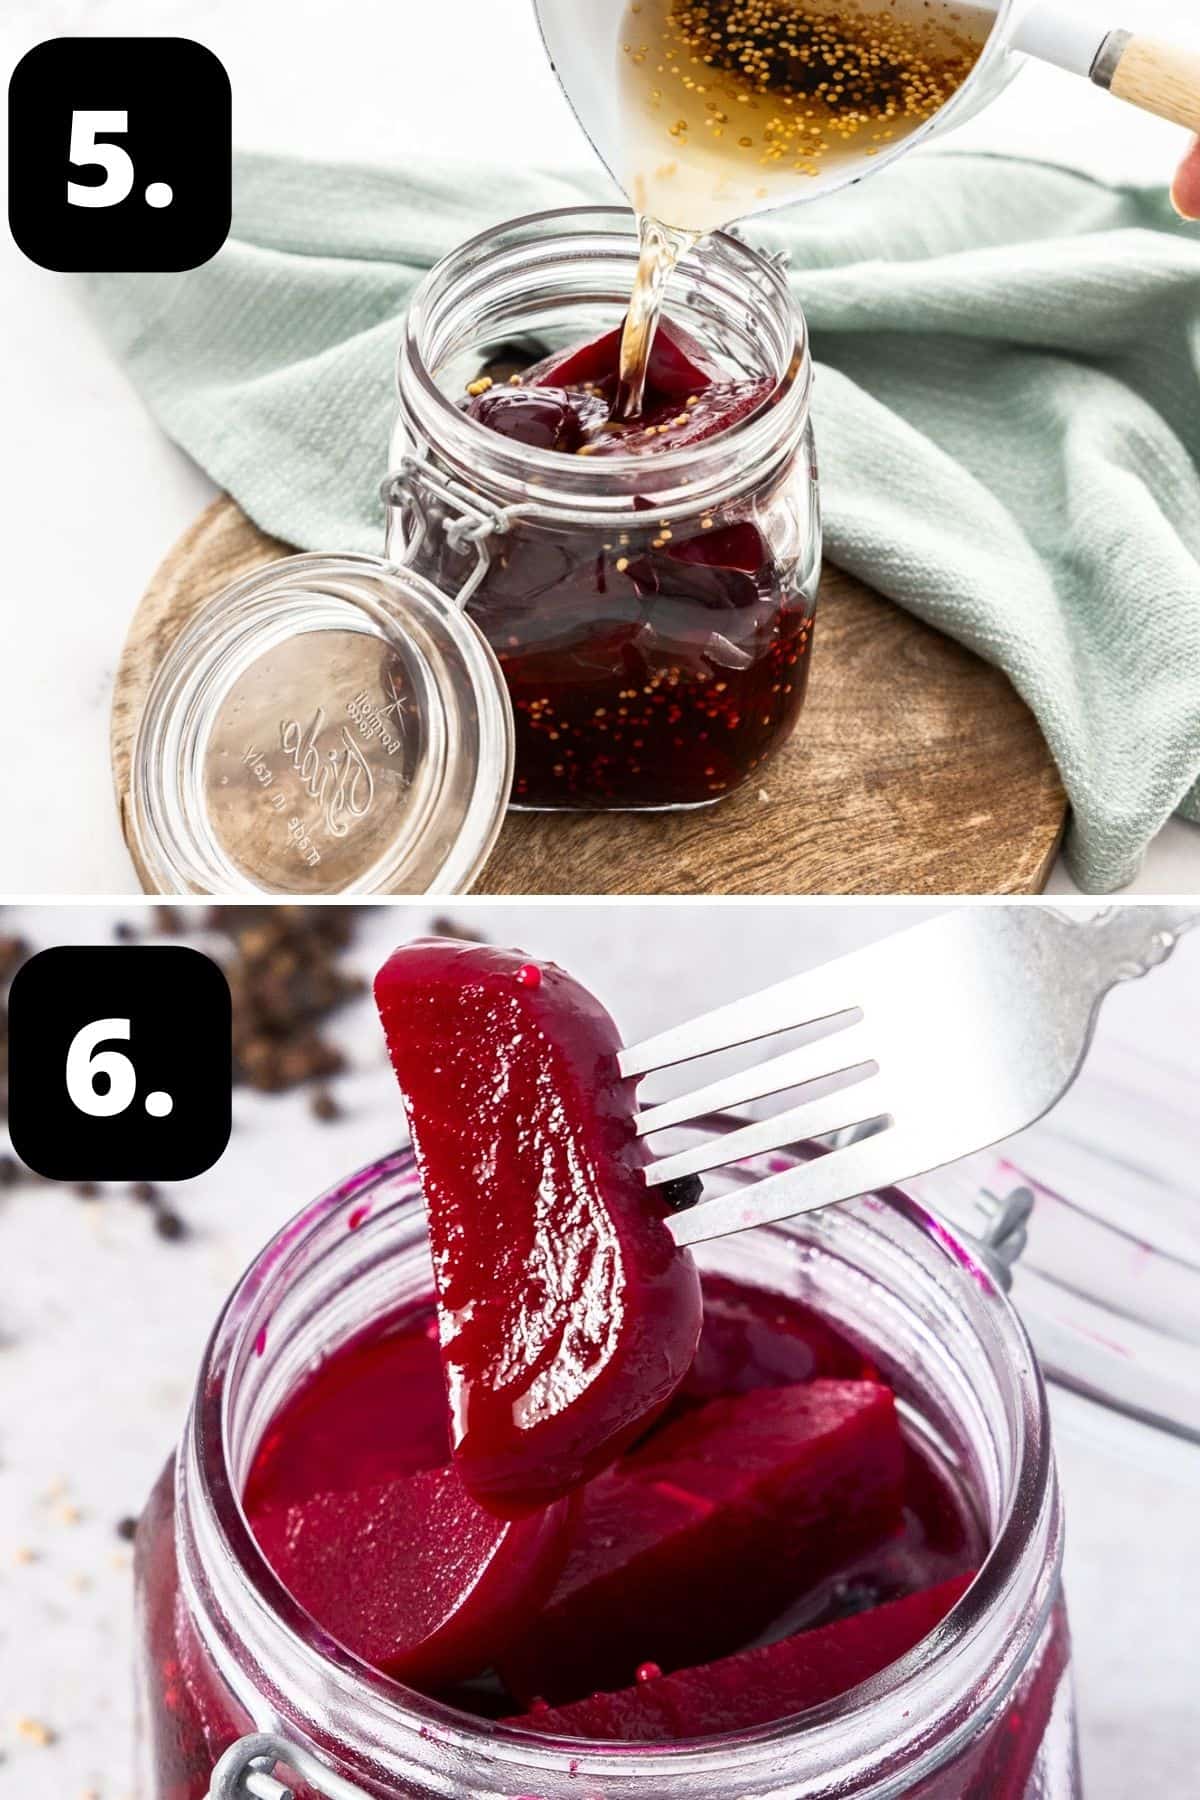 Steps 5-6 of preparing this recipe - adding the beetroot and brine to the jar and the pickled beetroot ready to eat.